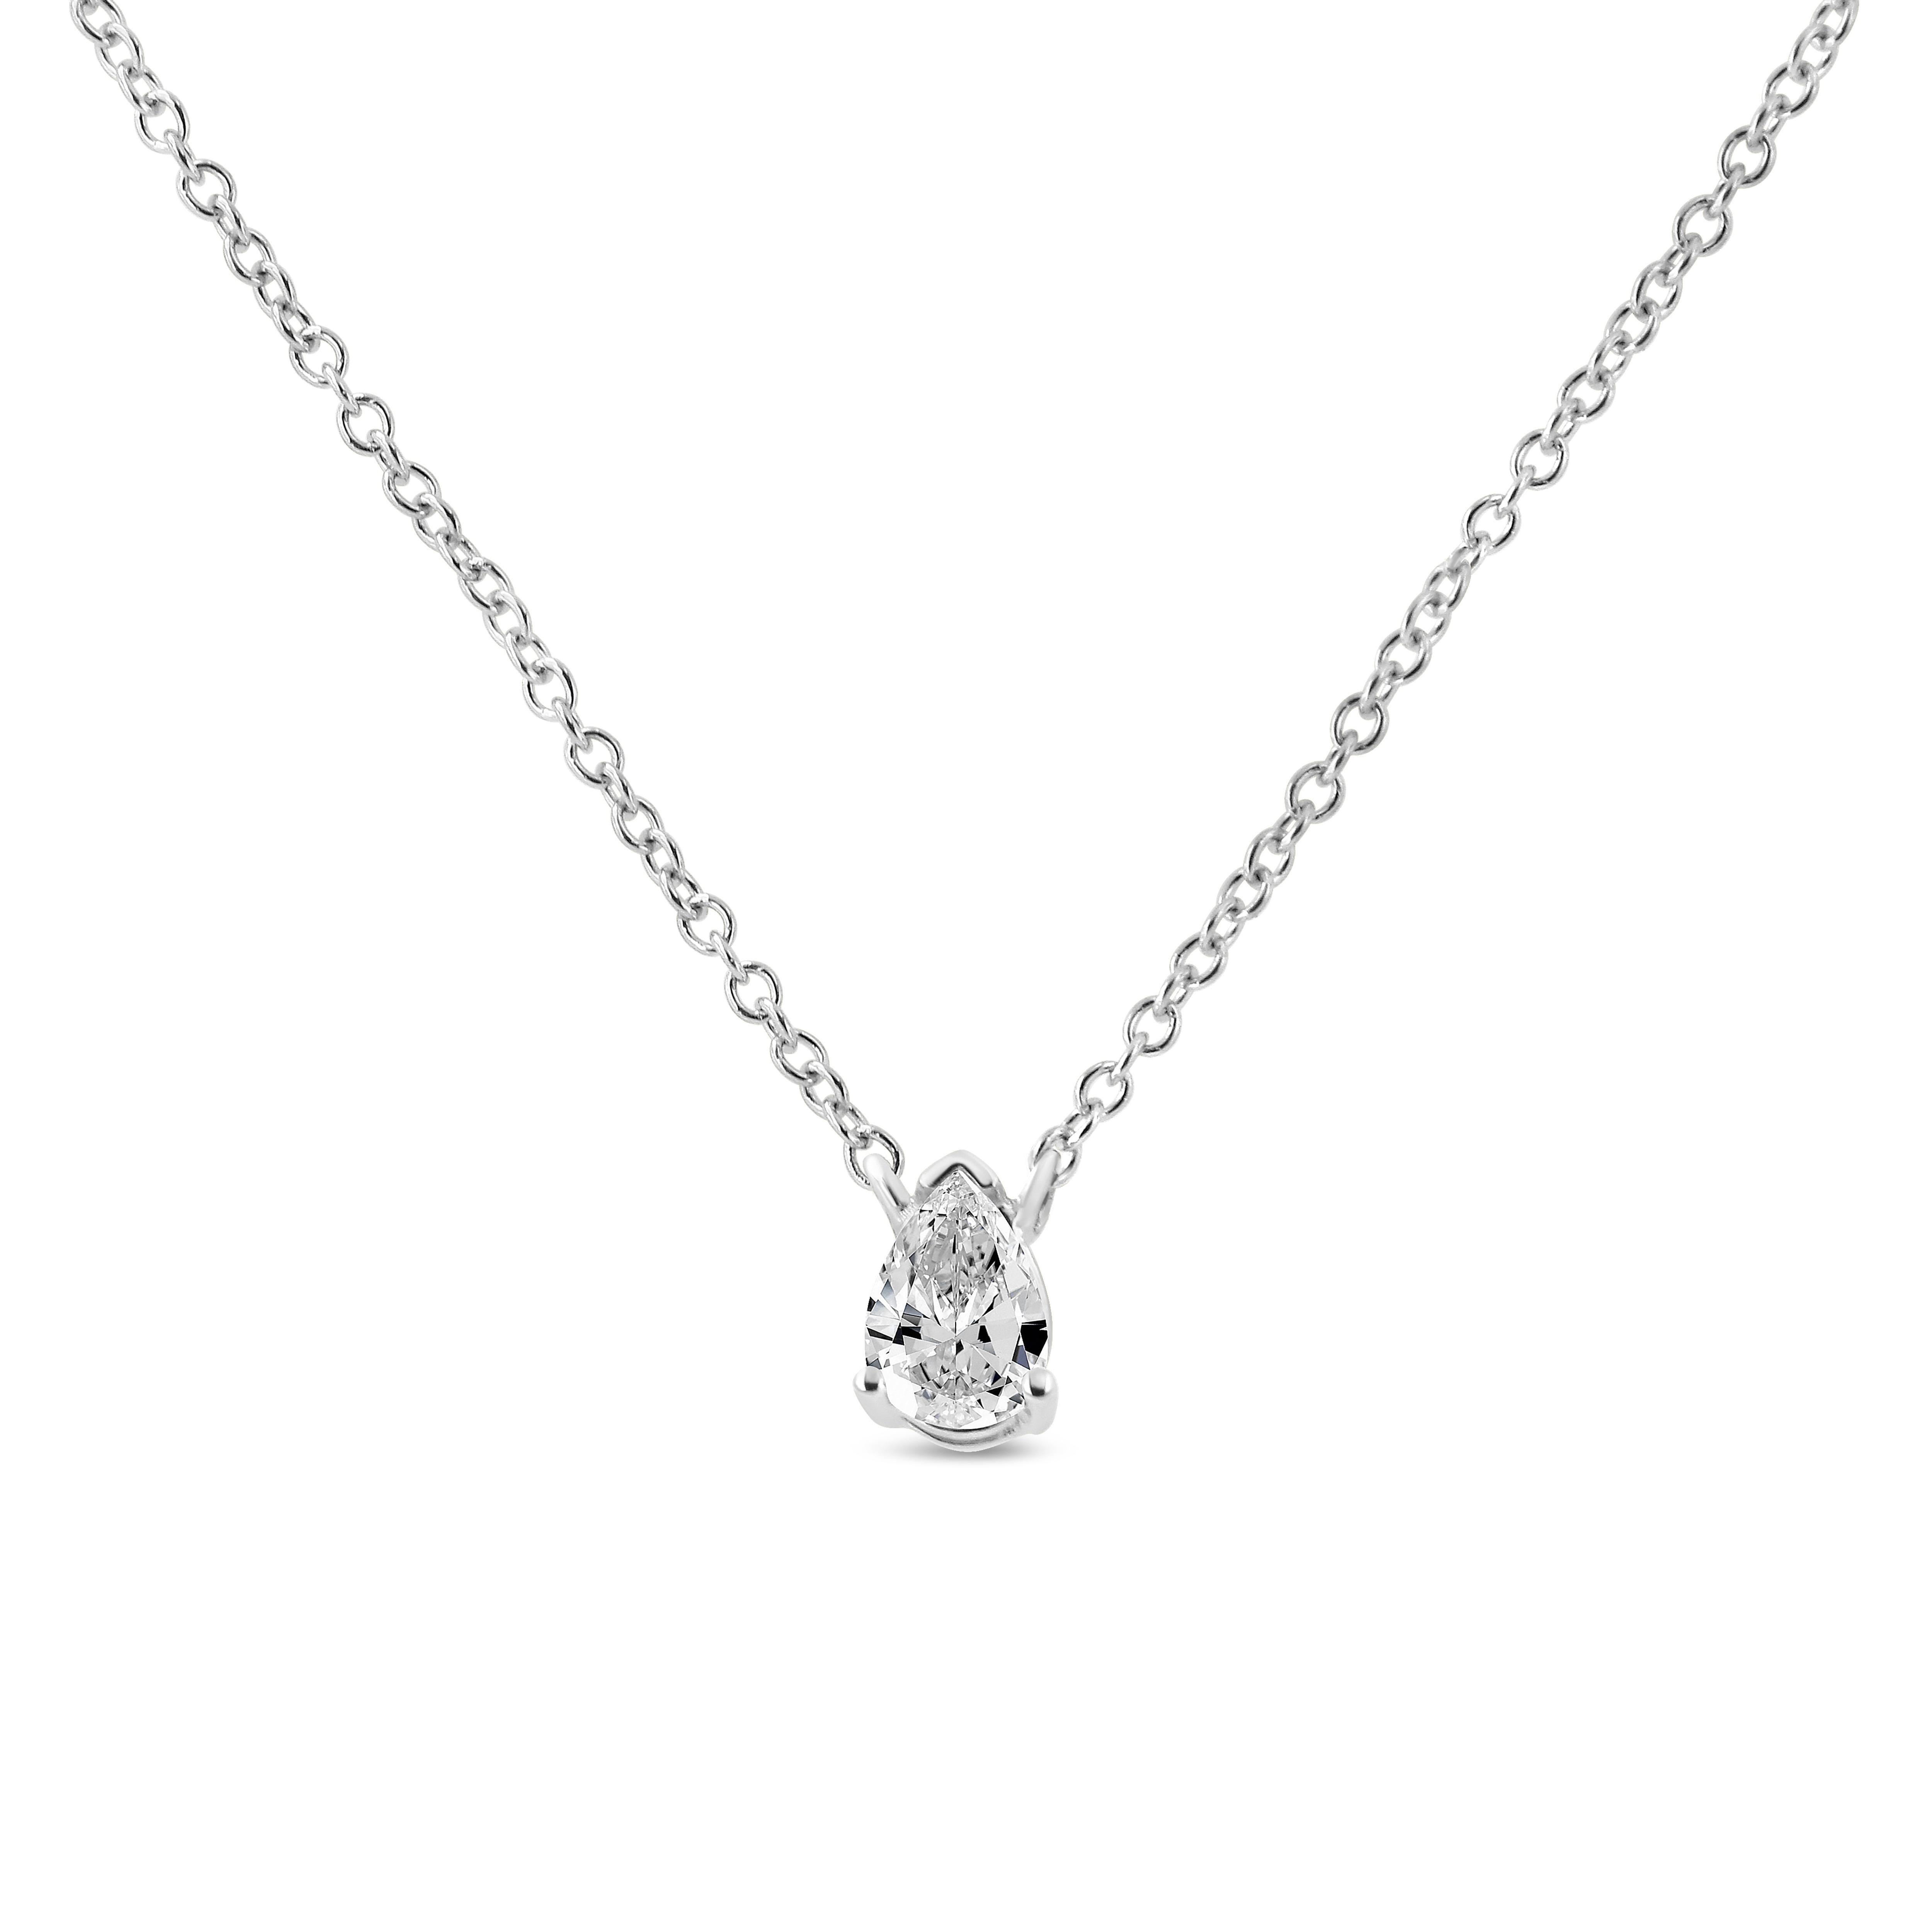 Exquisitely crafted, this solitaire diamond pendant necklace brilliantly showcases a 1/5 cttw pear-shaped diamond, nestled in a 4-prong prong. It is crafted in genuine 14k white gold, a metal that will stay tarnish free for years to come. The